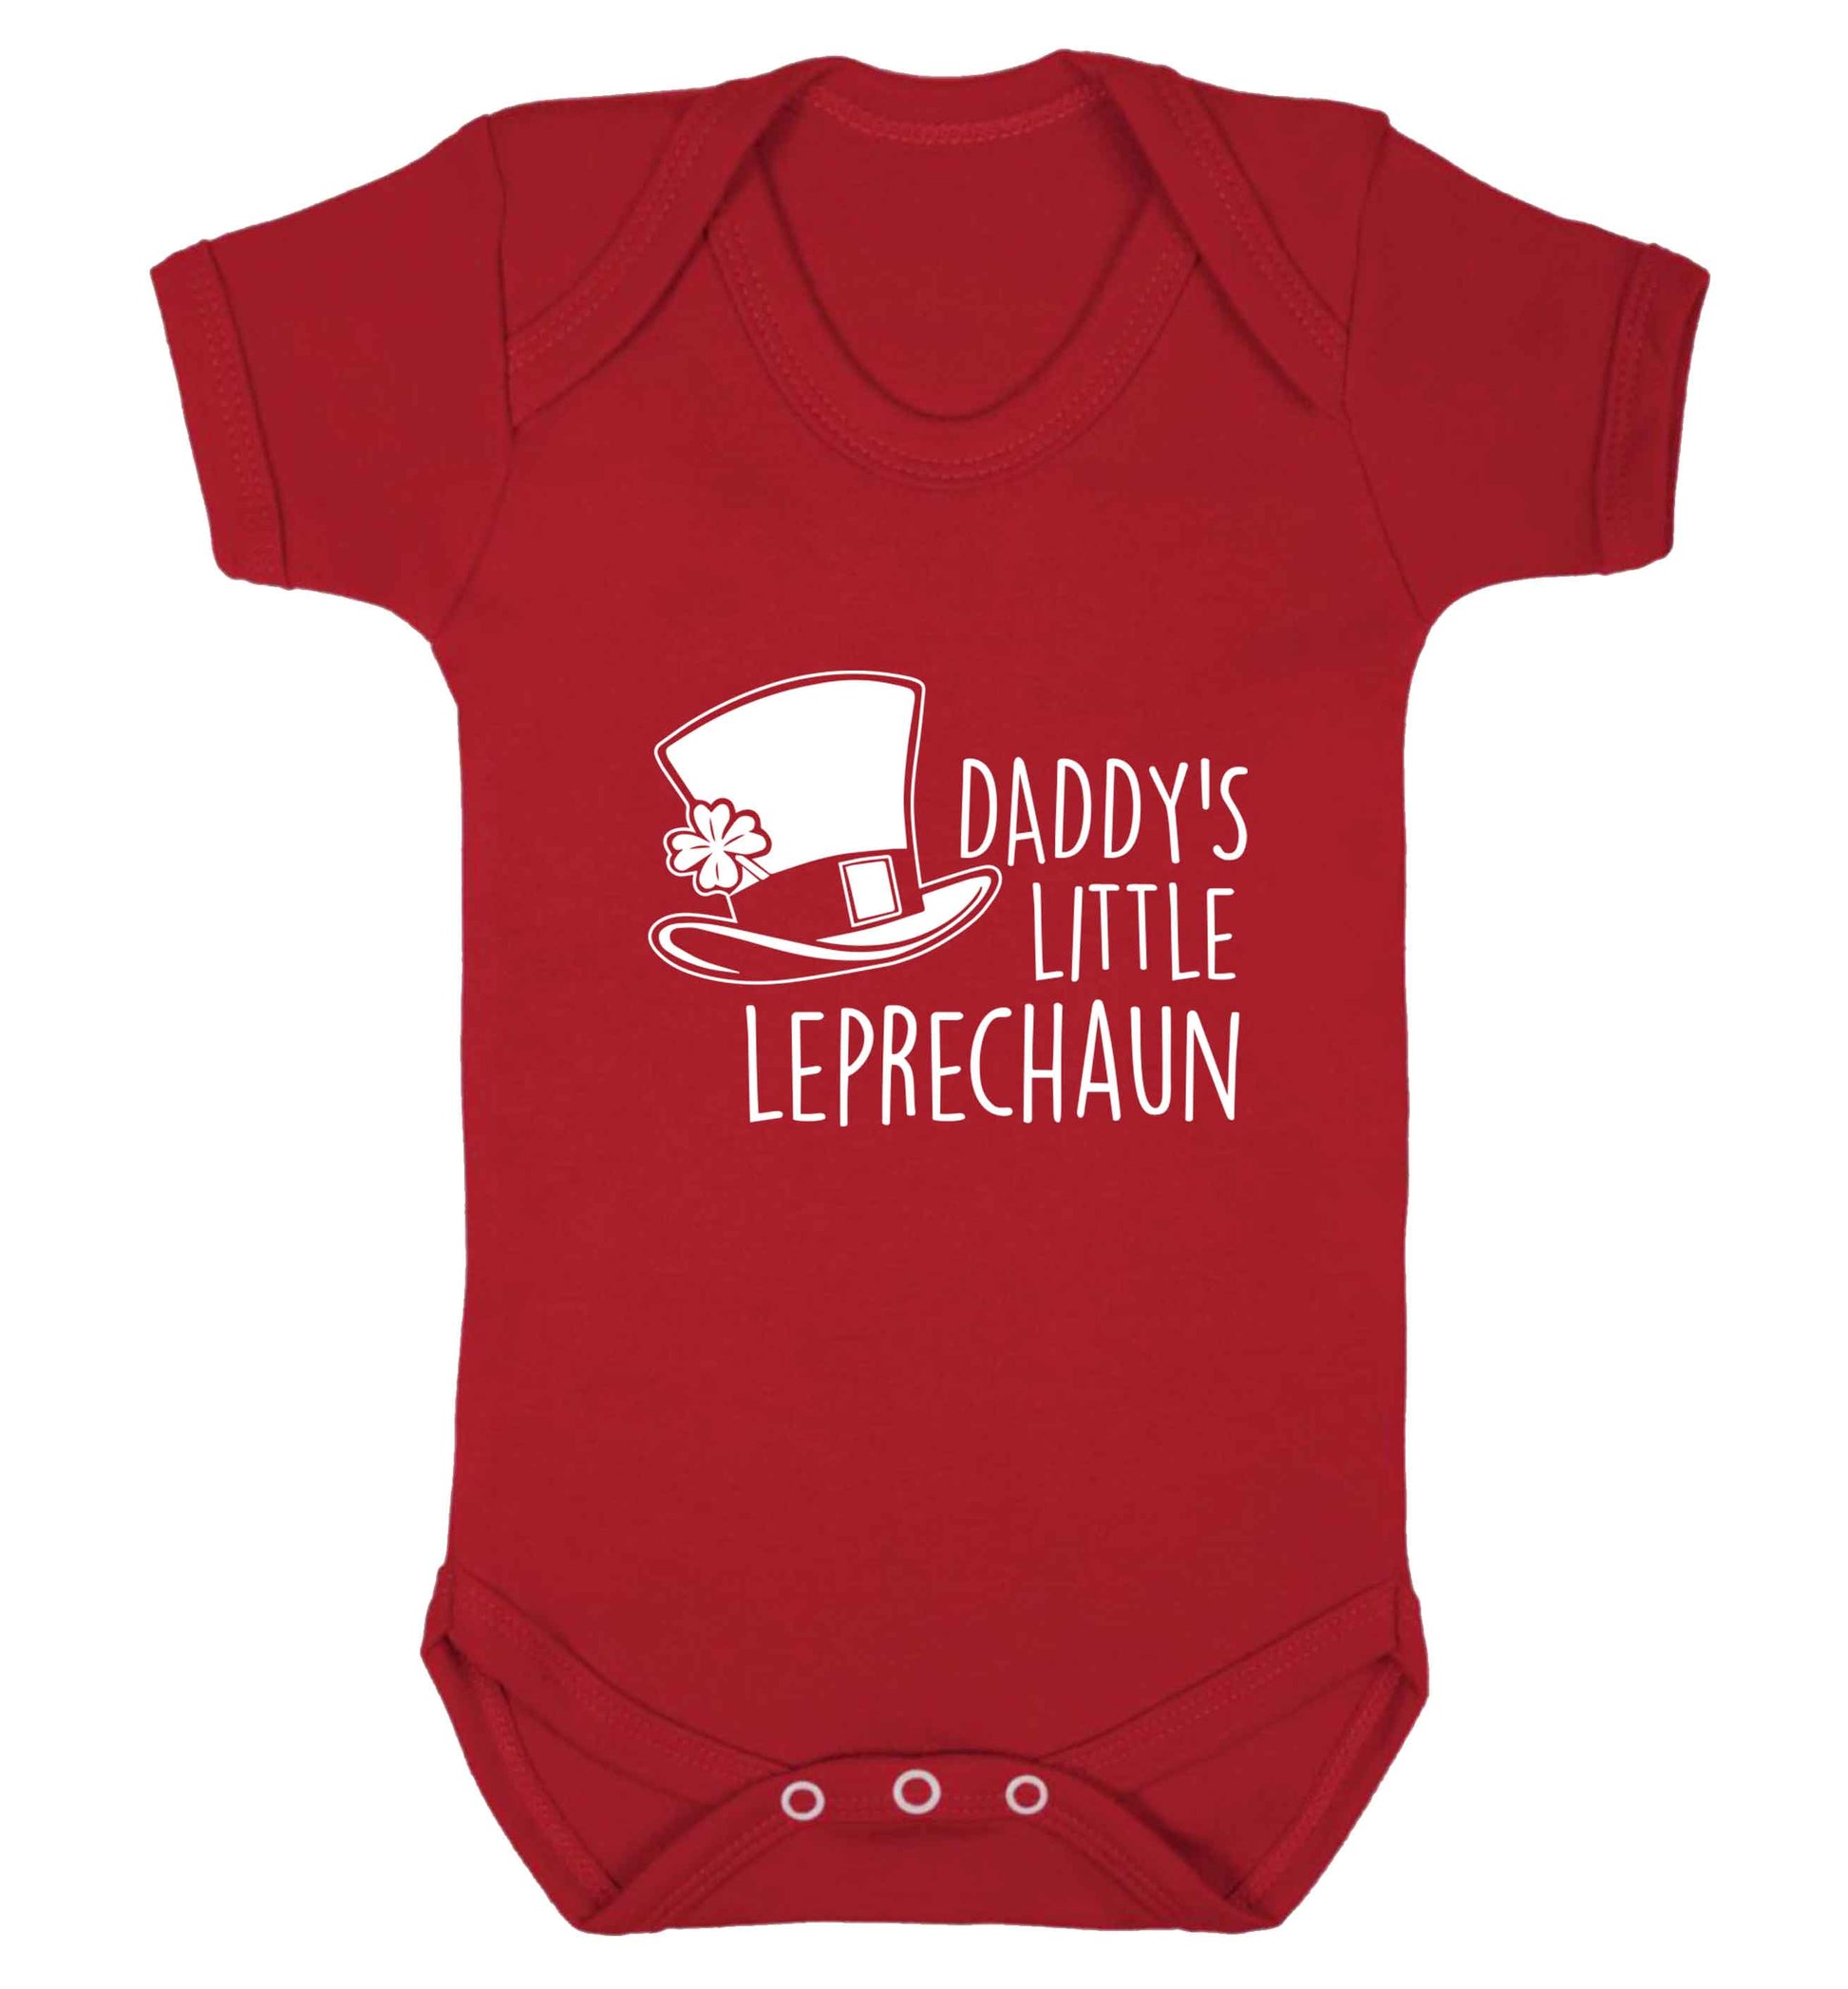 Daddy's lucky charm baby vest red 18-24 months